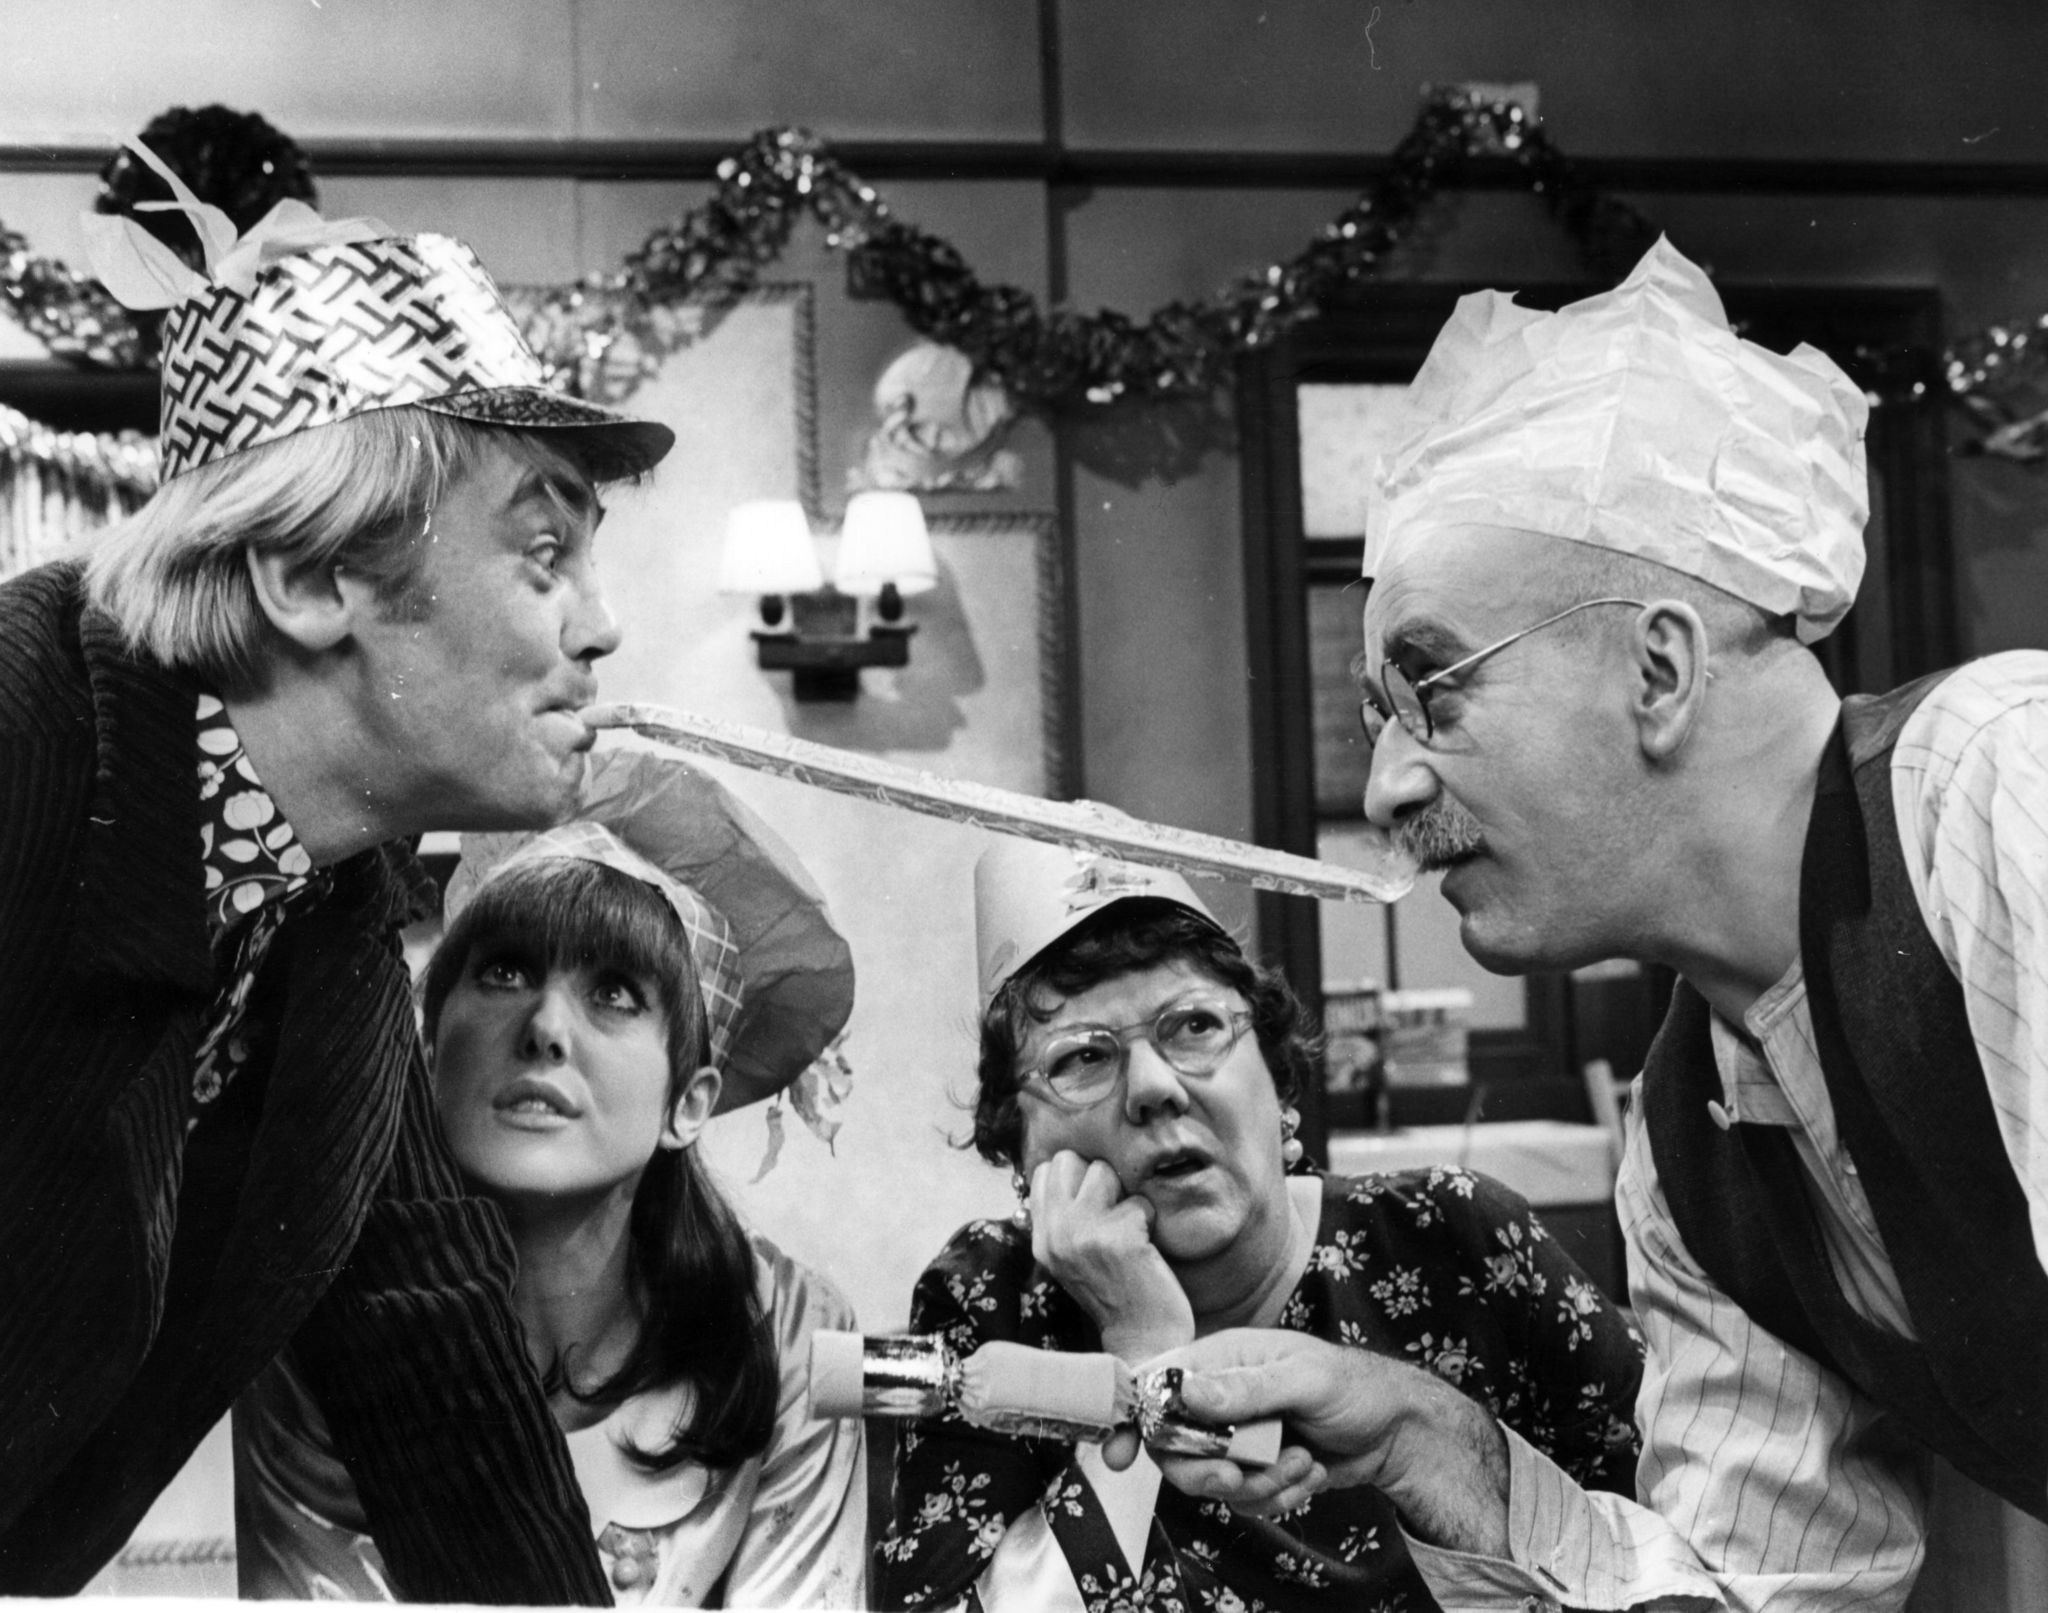 Anthony Booth, Warren Mitchell, Dandy Nichols, and Una Stubbs in Till Death Us Do Part (1965)